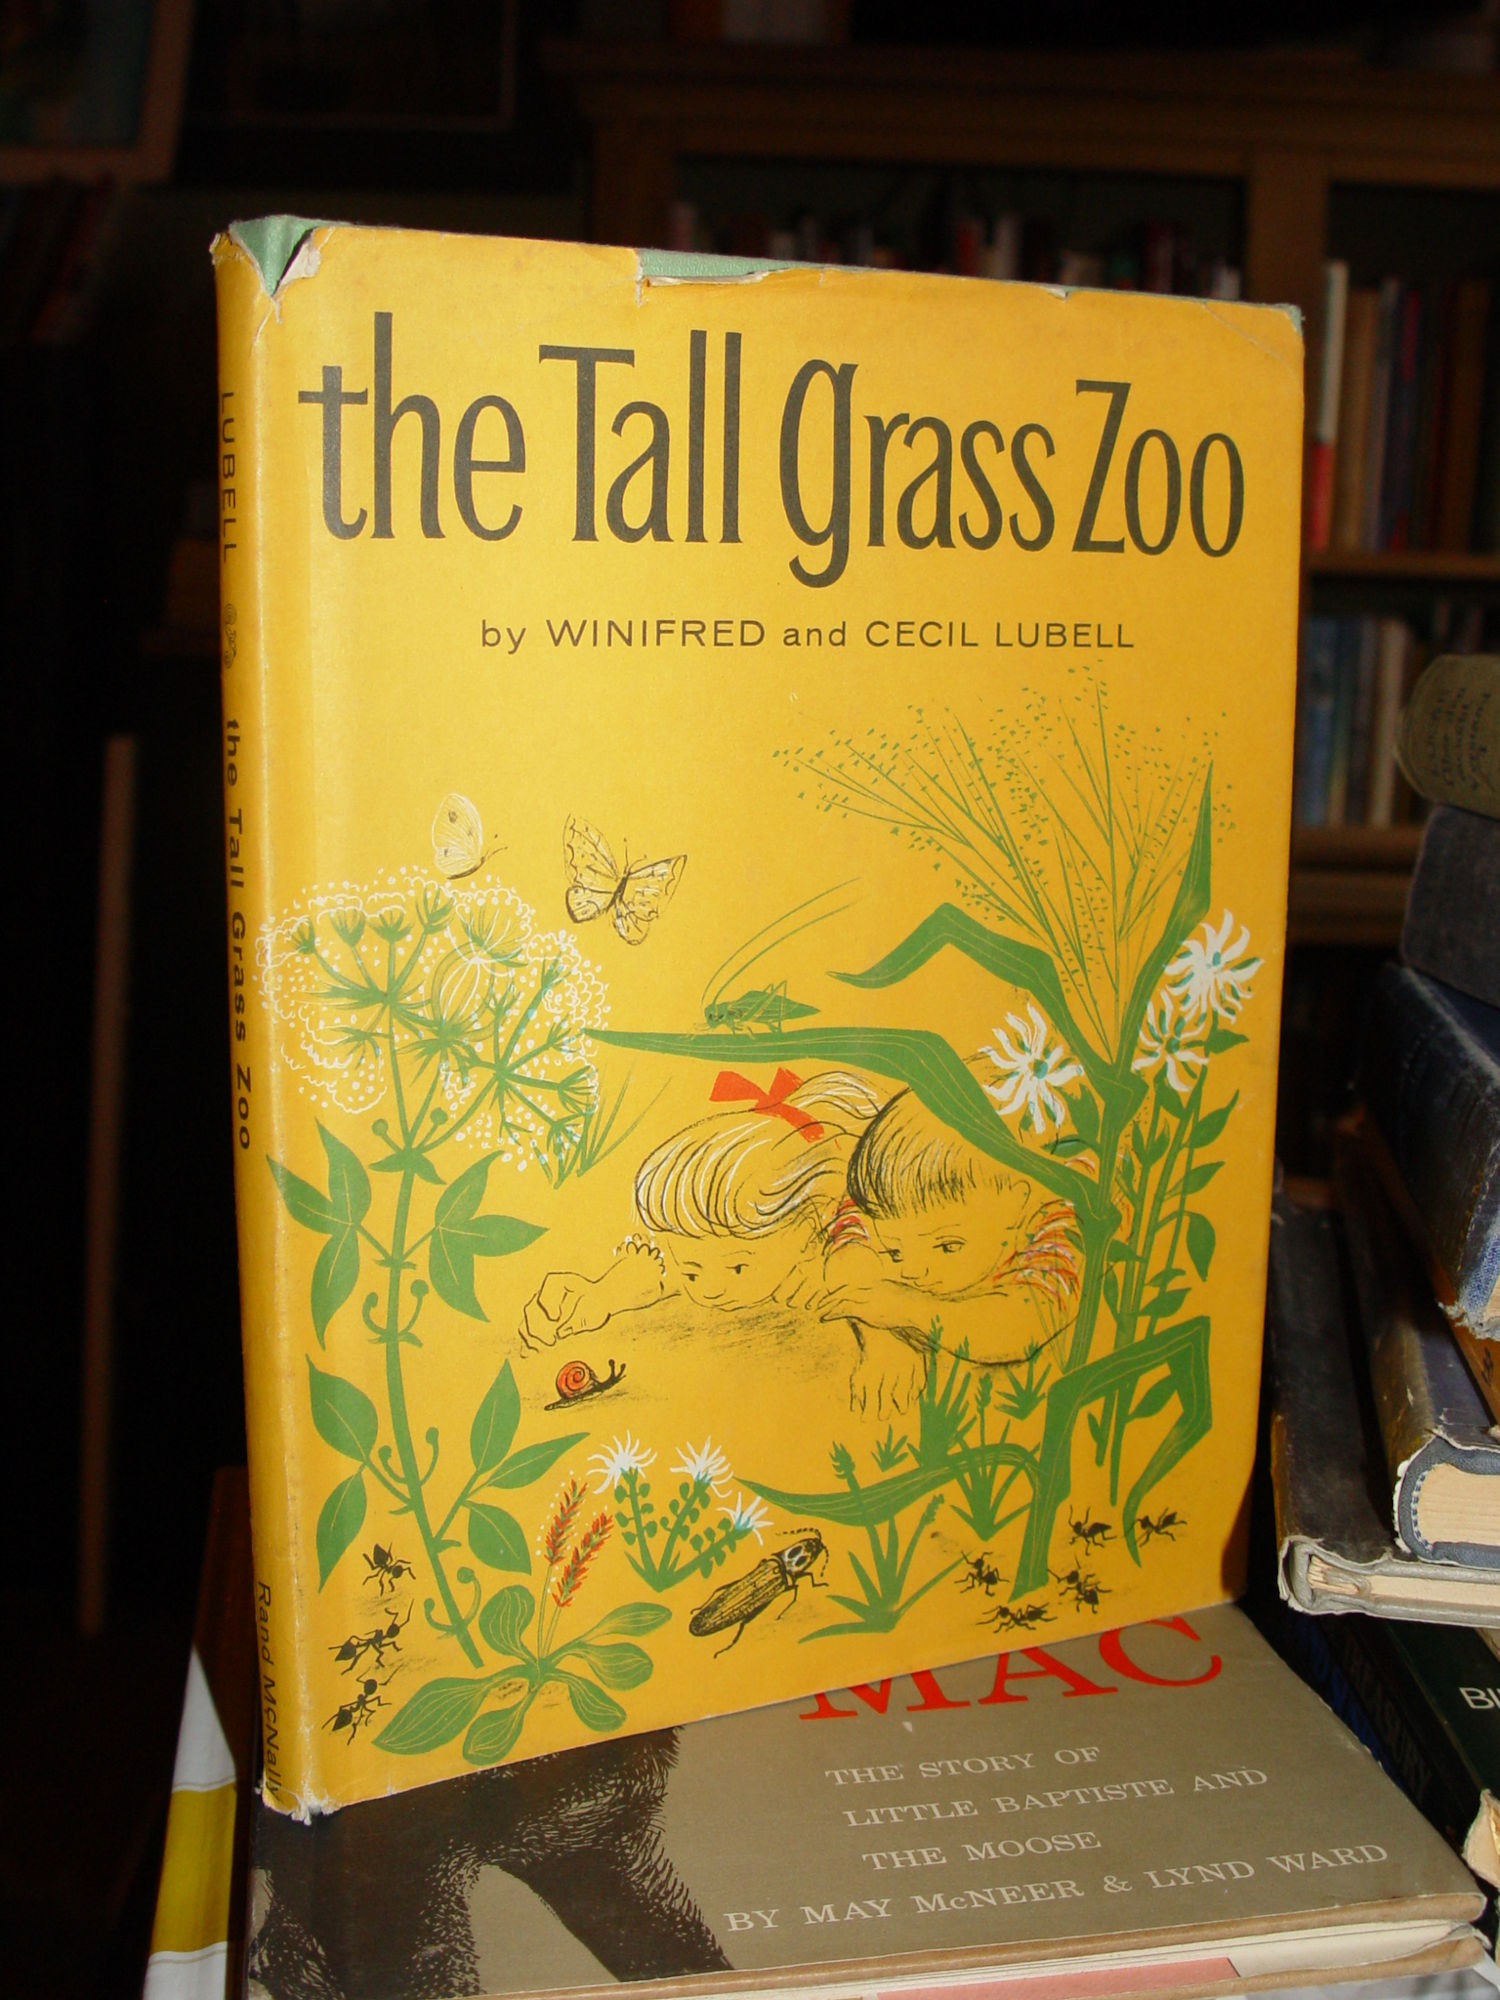 The
                Tall Grass Zoo, Winifred and Cecil Lubell, 1961